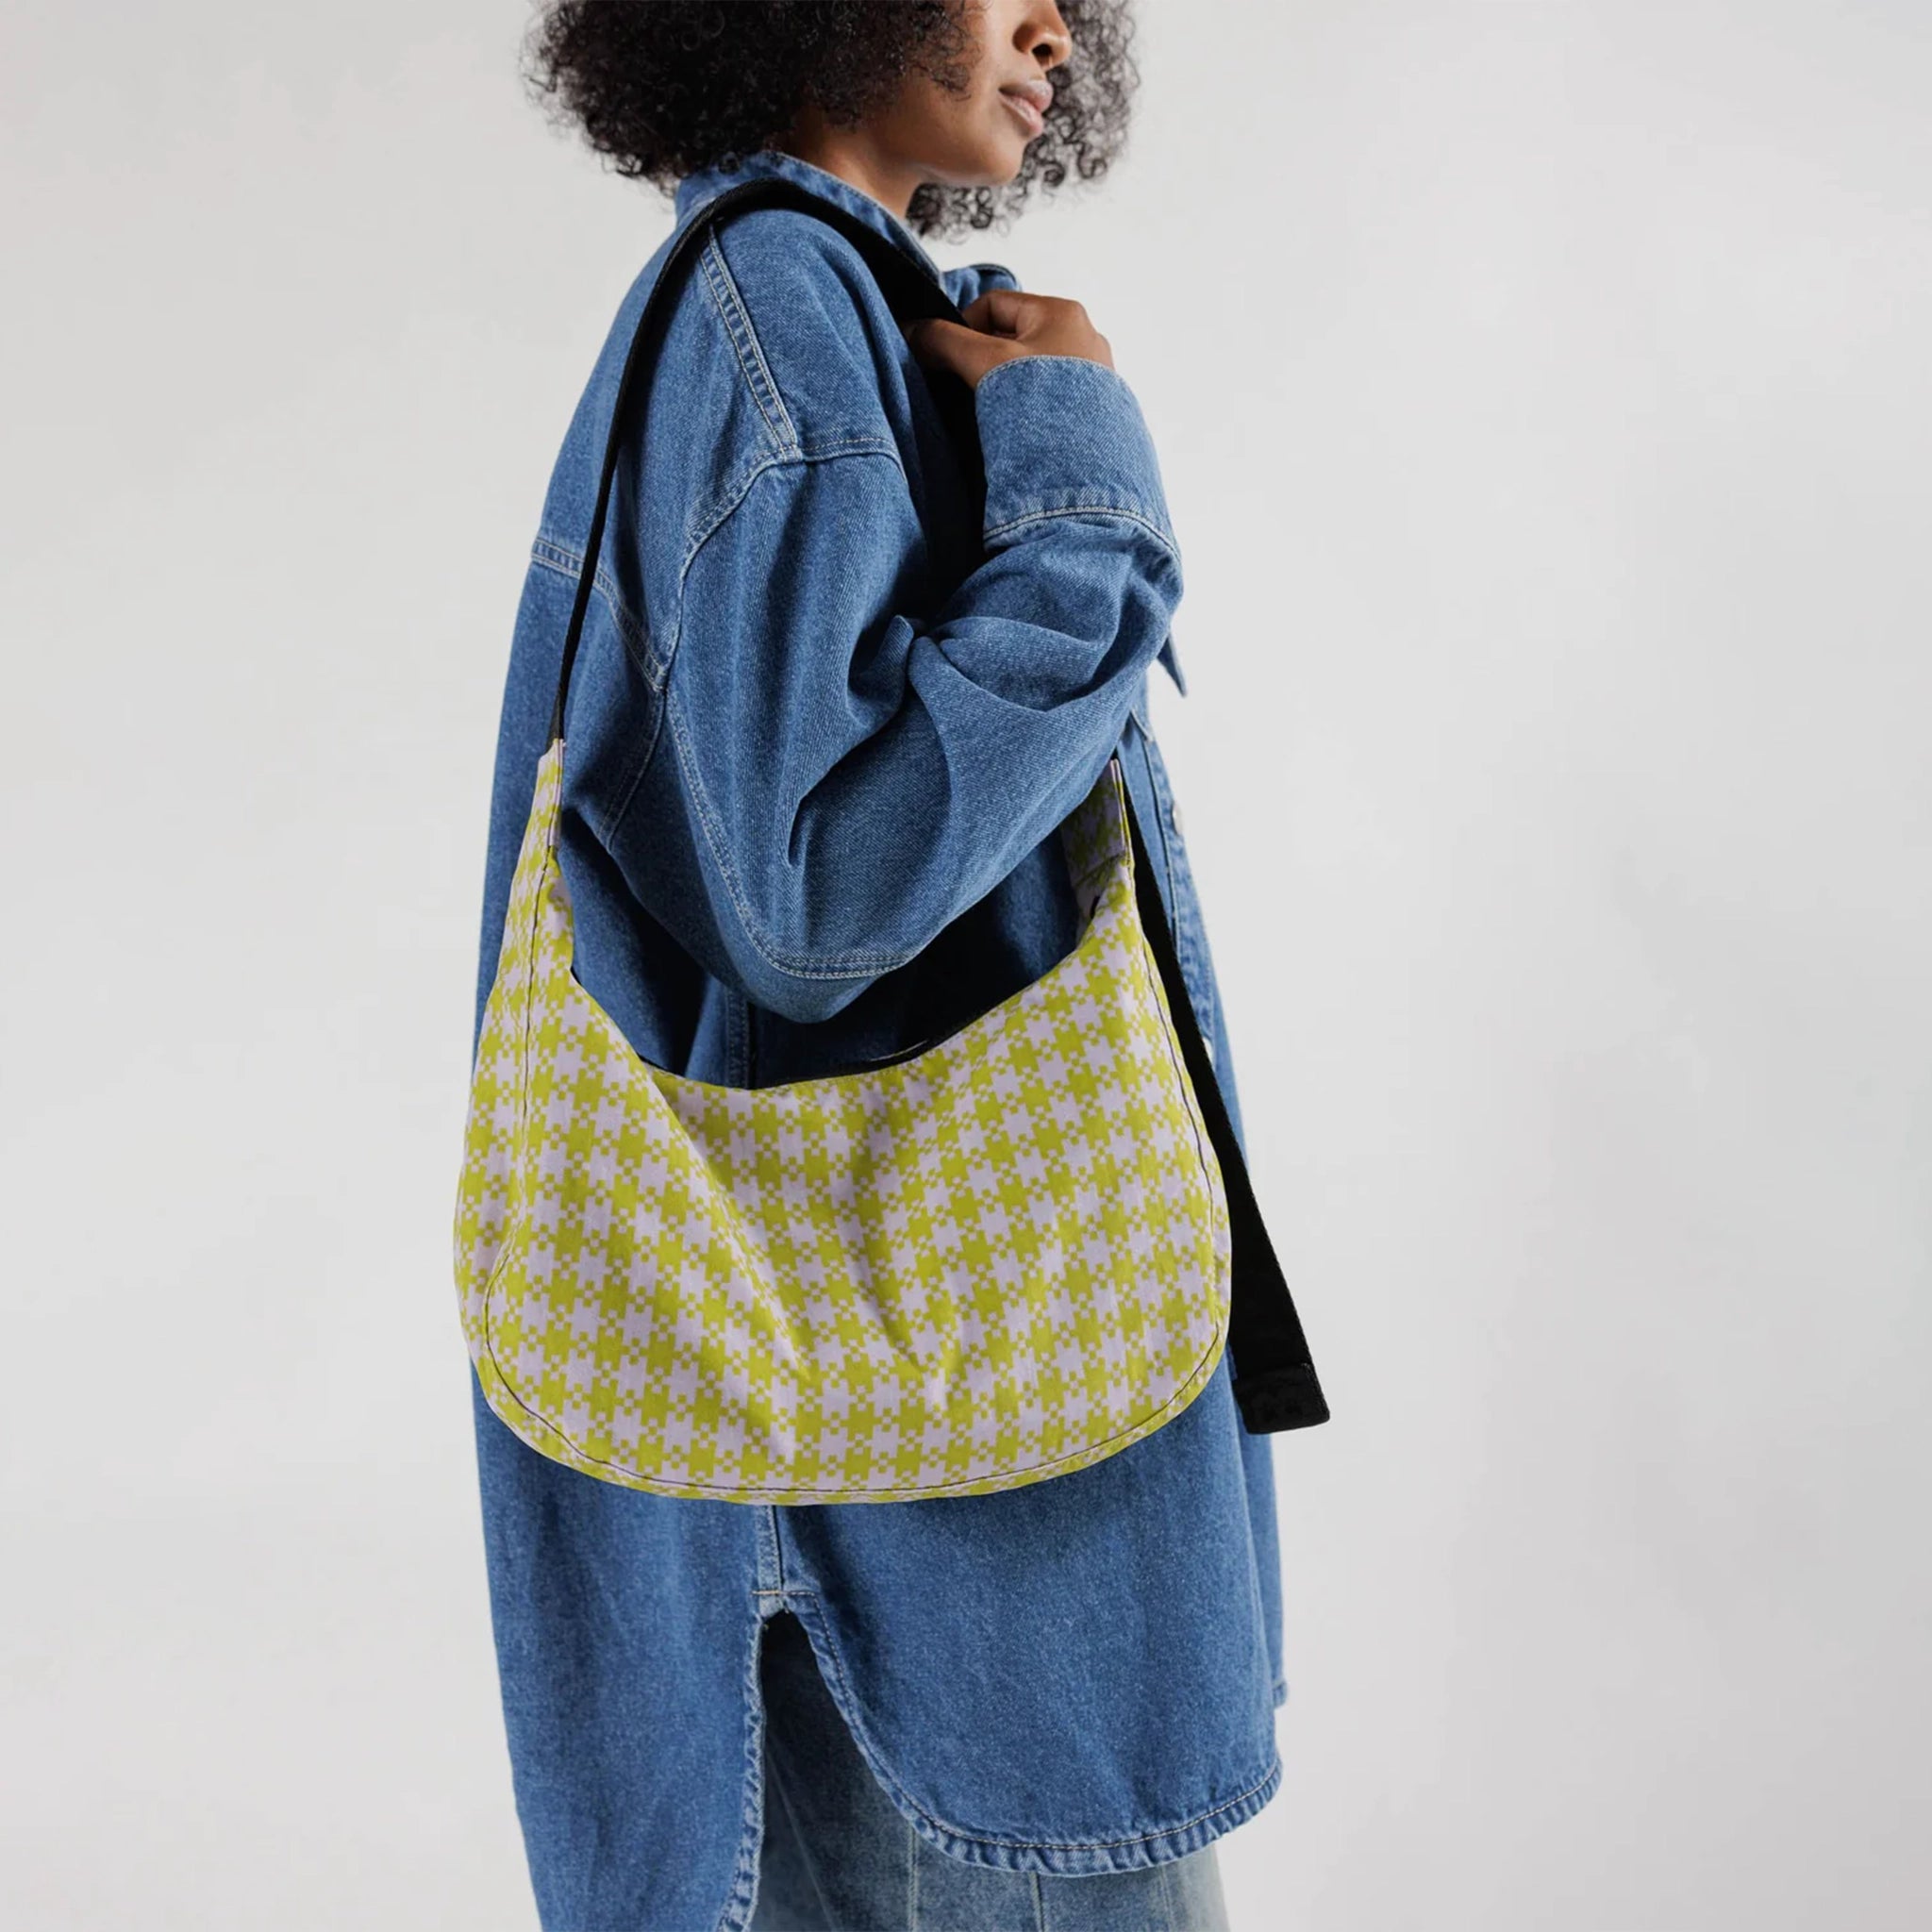 A light pink and lime green gingham nylon crescent shaped bag with an adjustable black strap that reads, "BAGGU" in black and a single zipper.